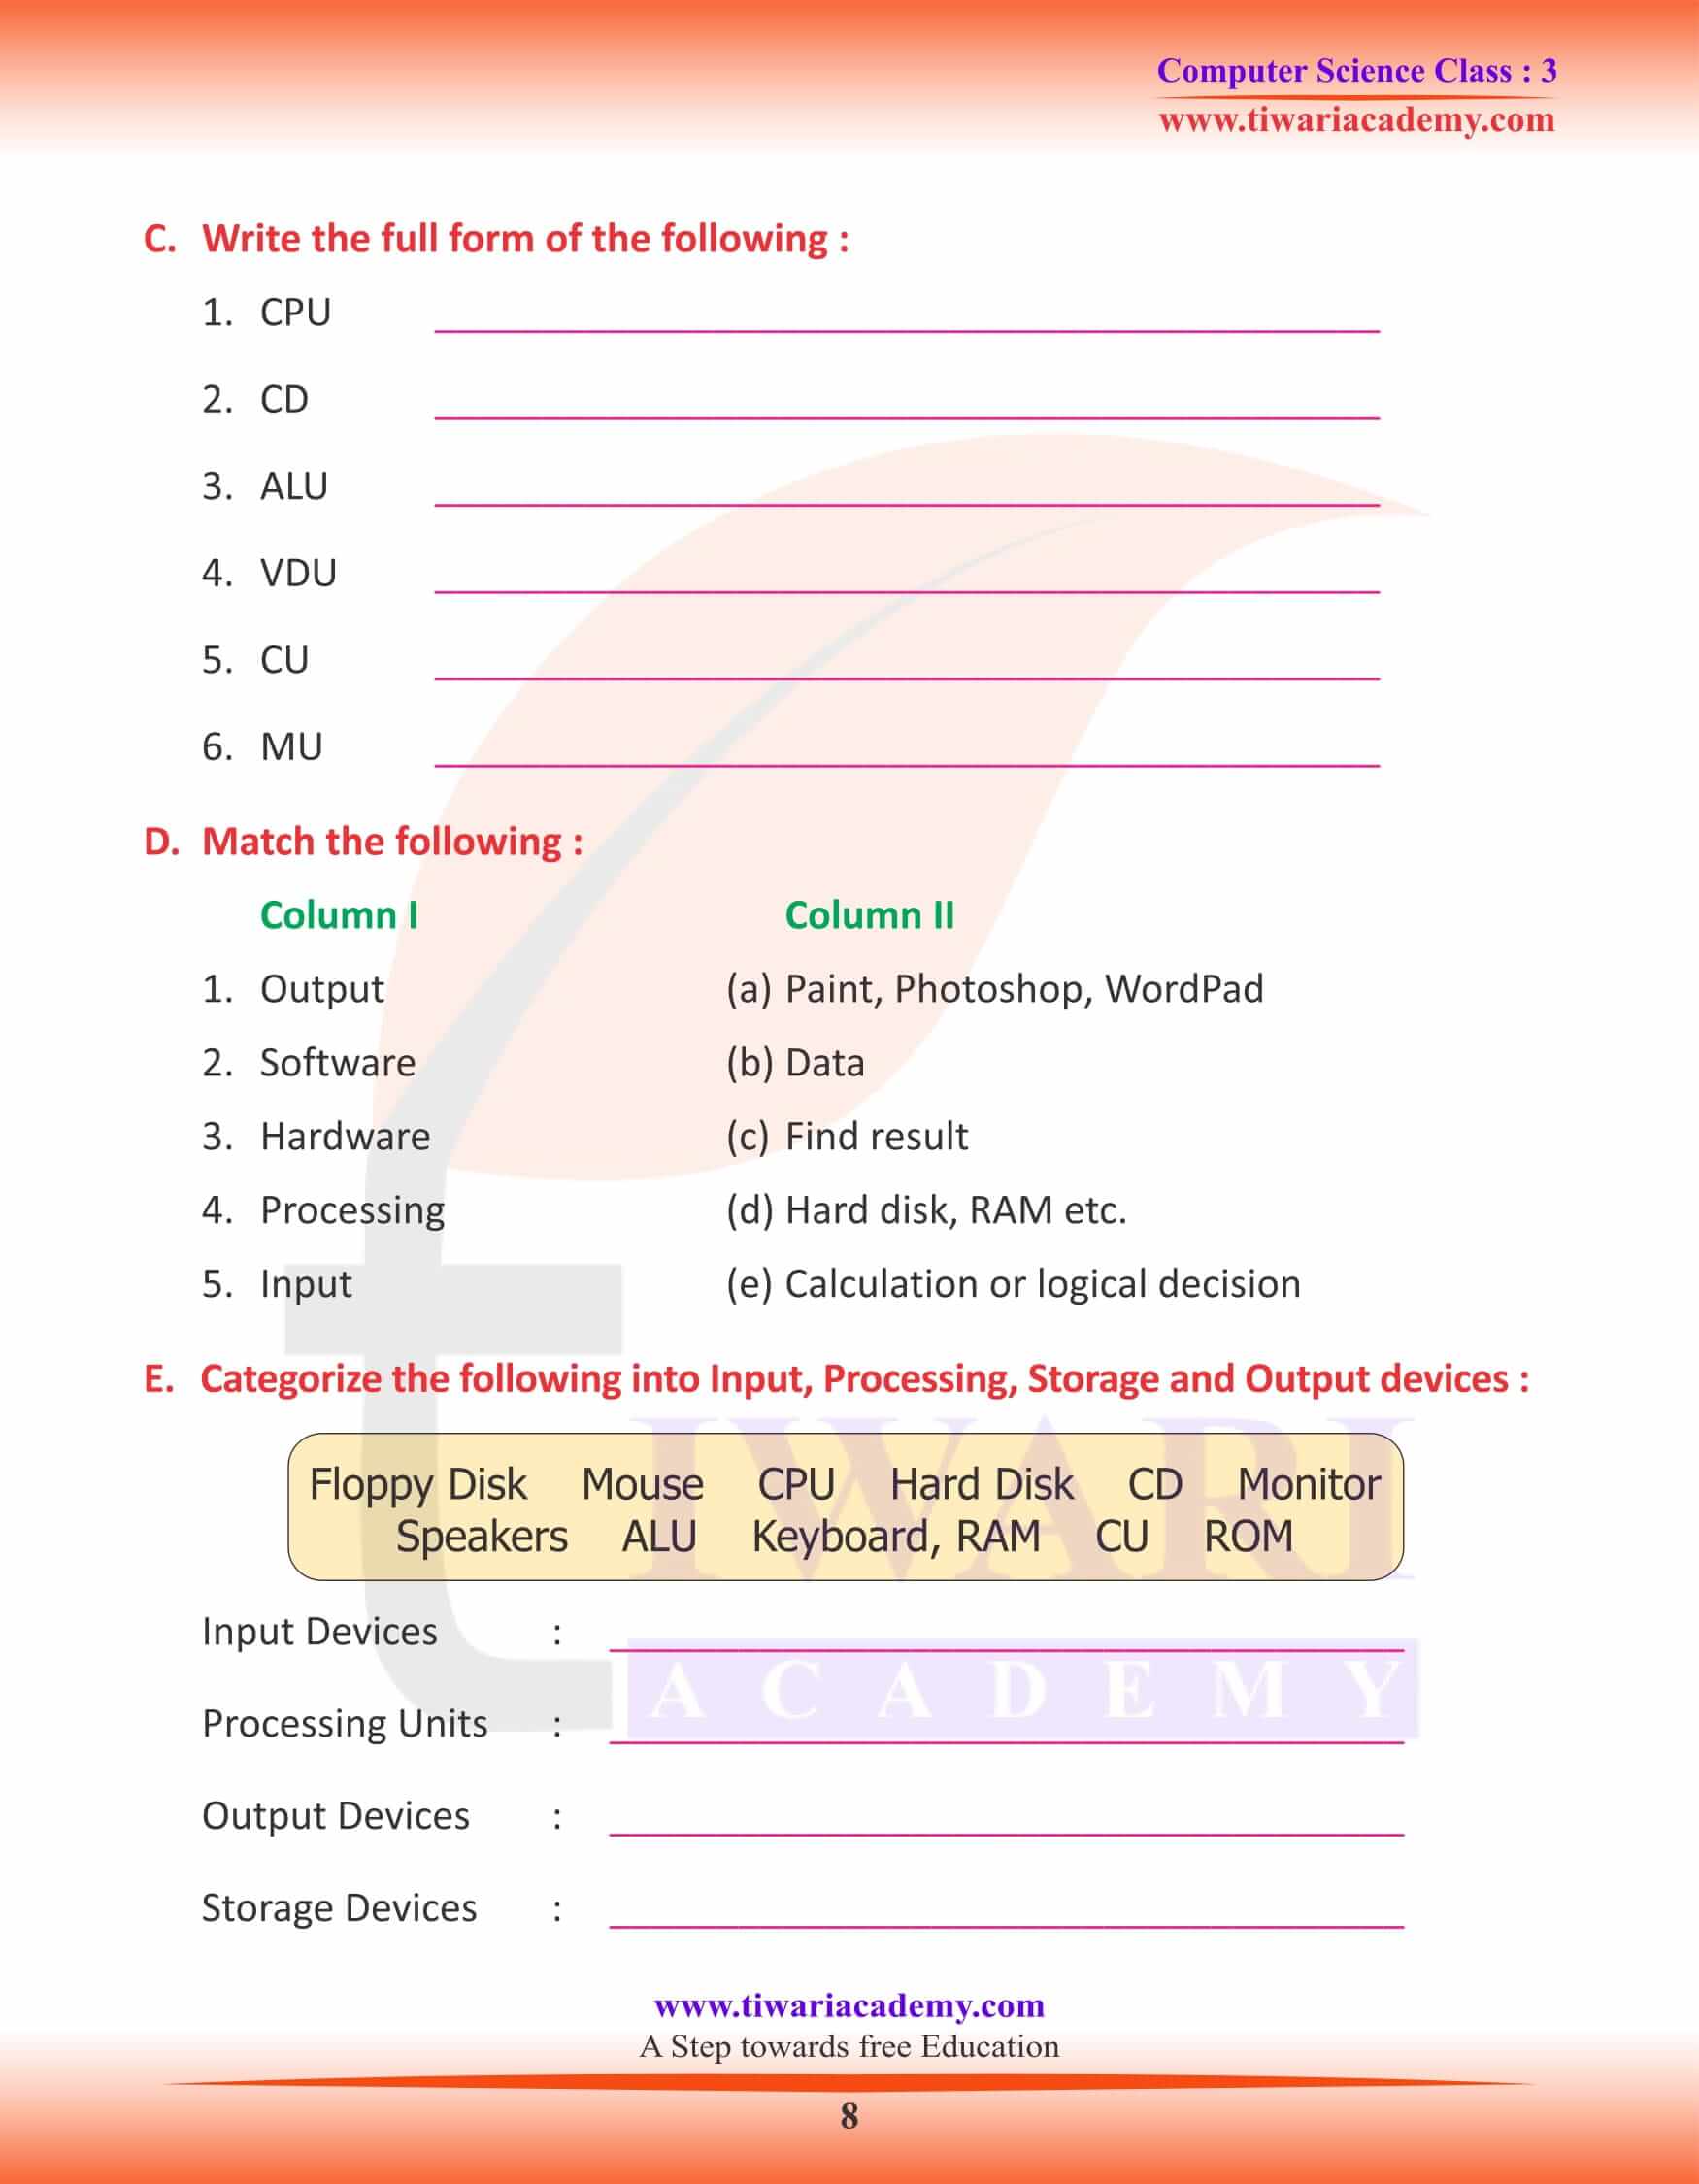 NCERT Solutions for Class 3 Computer Science Chapter 2 notes